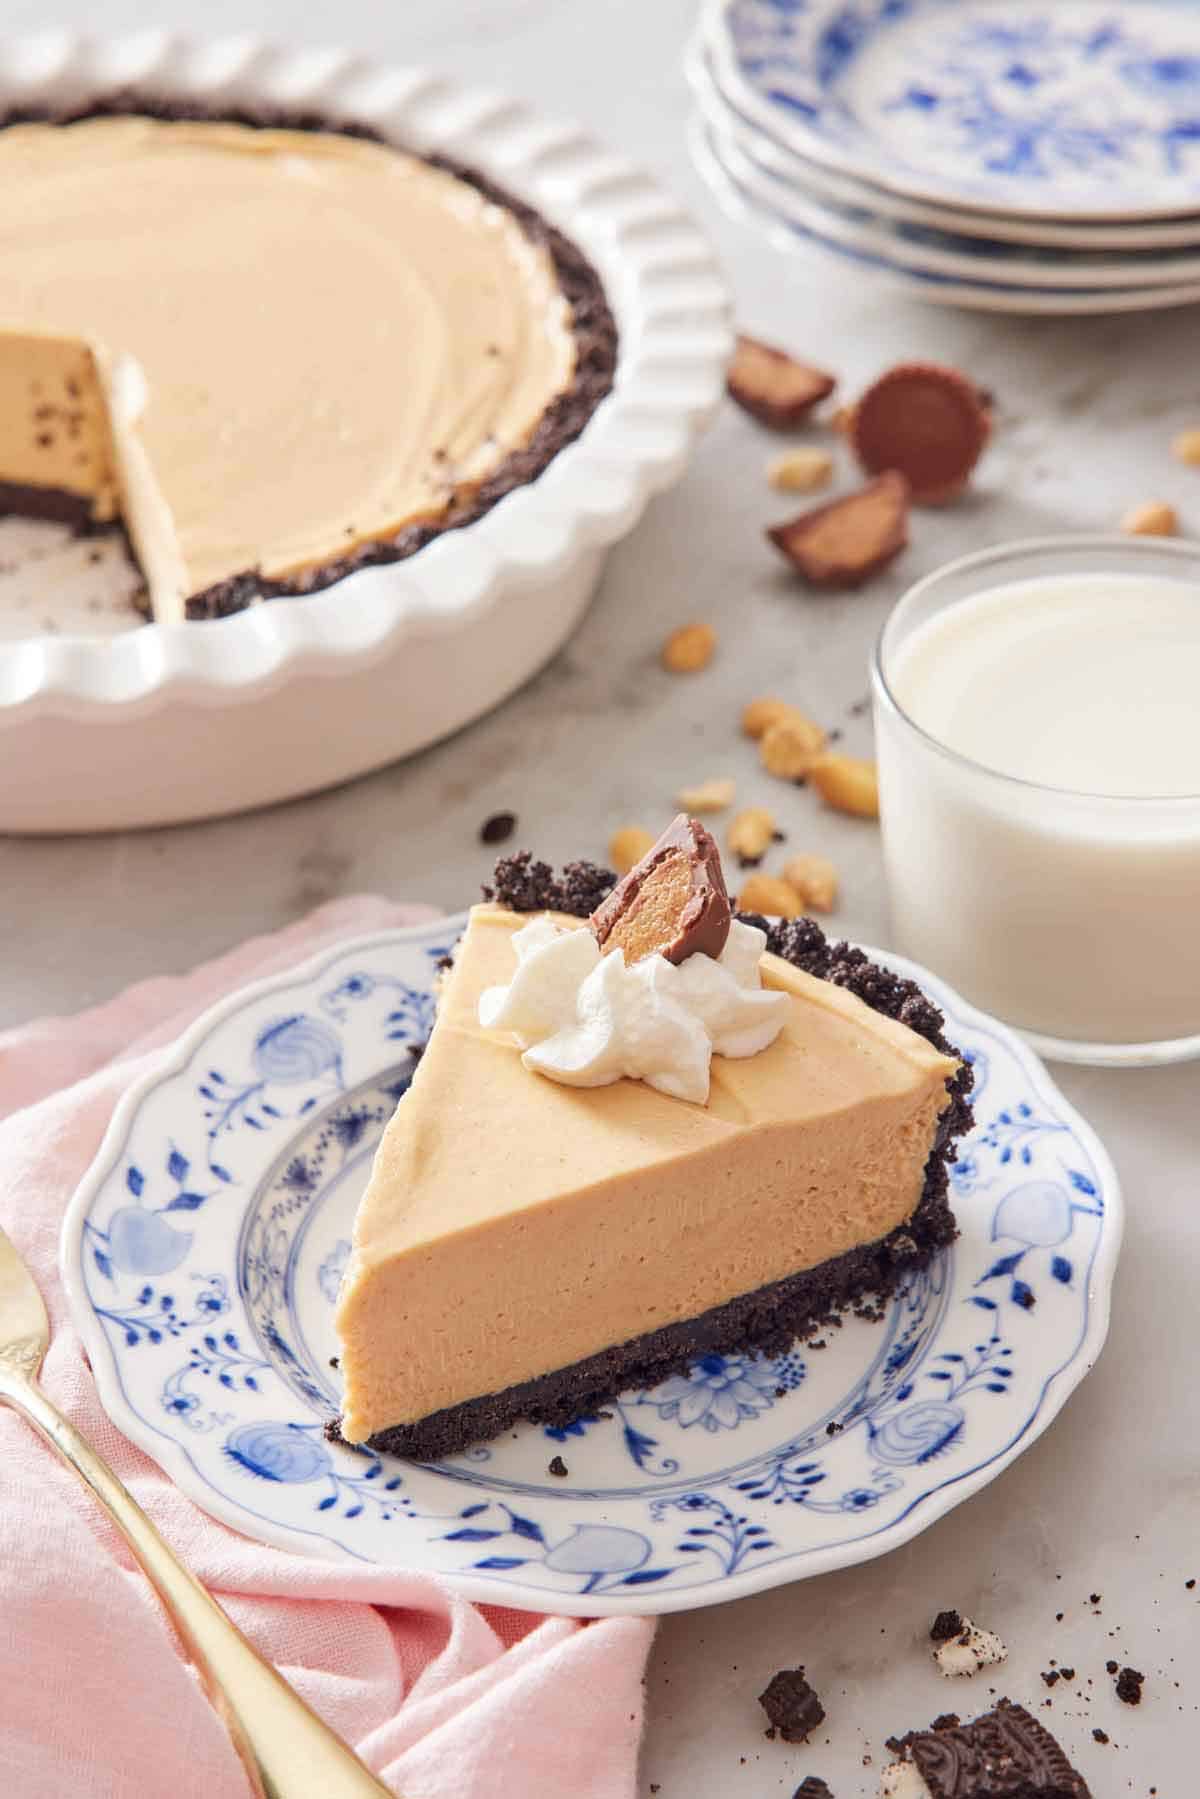 A slice of peanut butter pie with a glass of milk and the rest of the pie in the background.